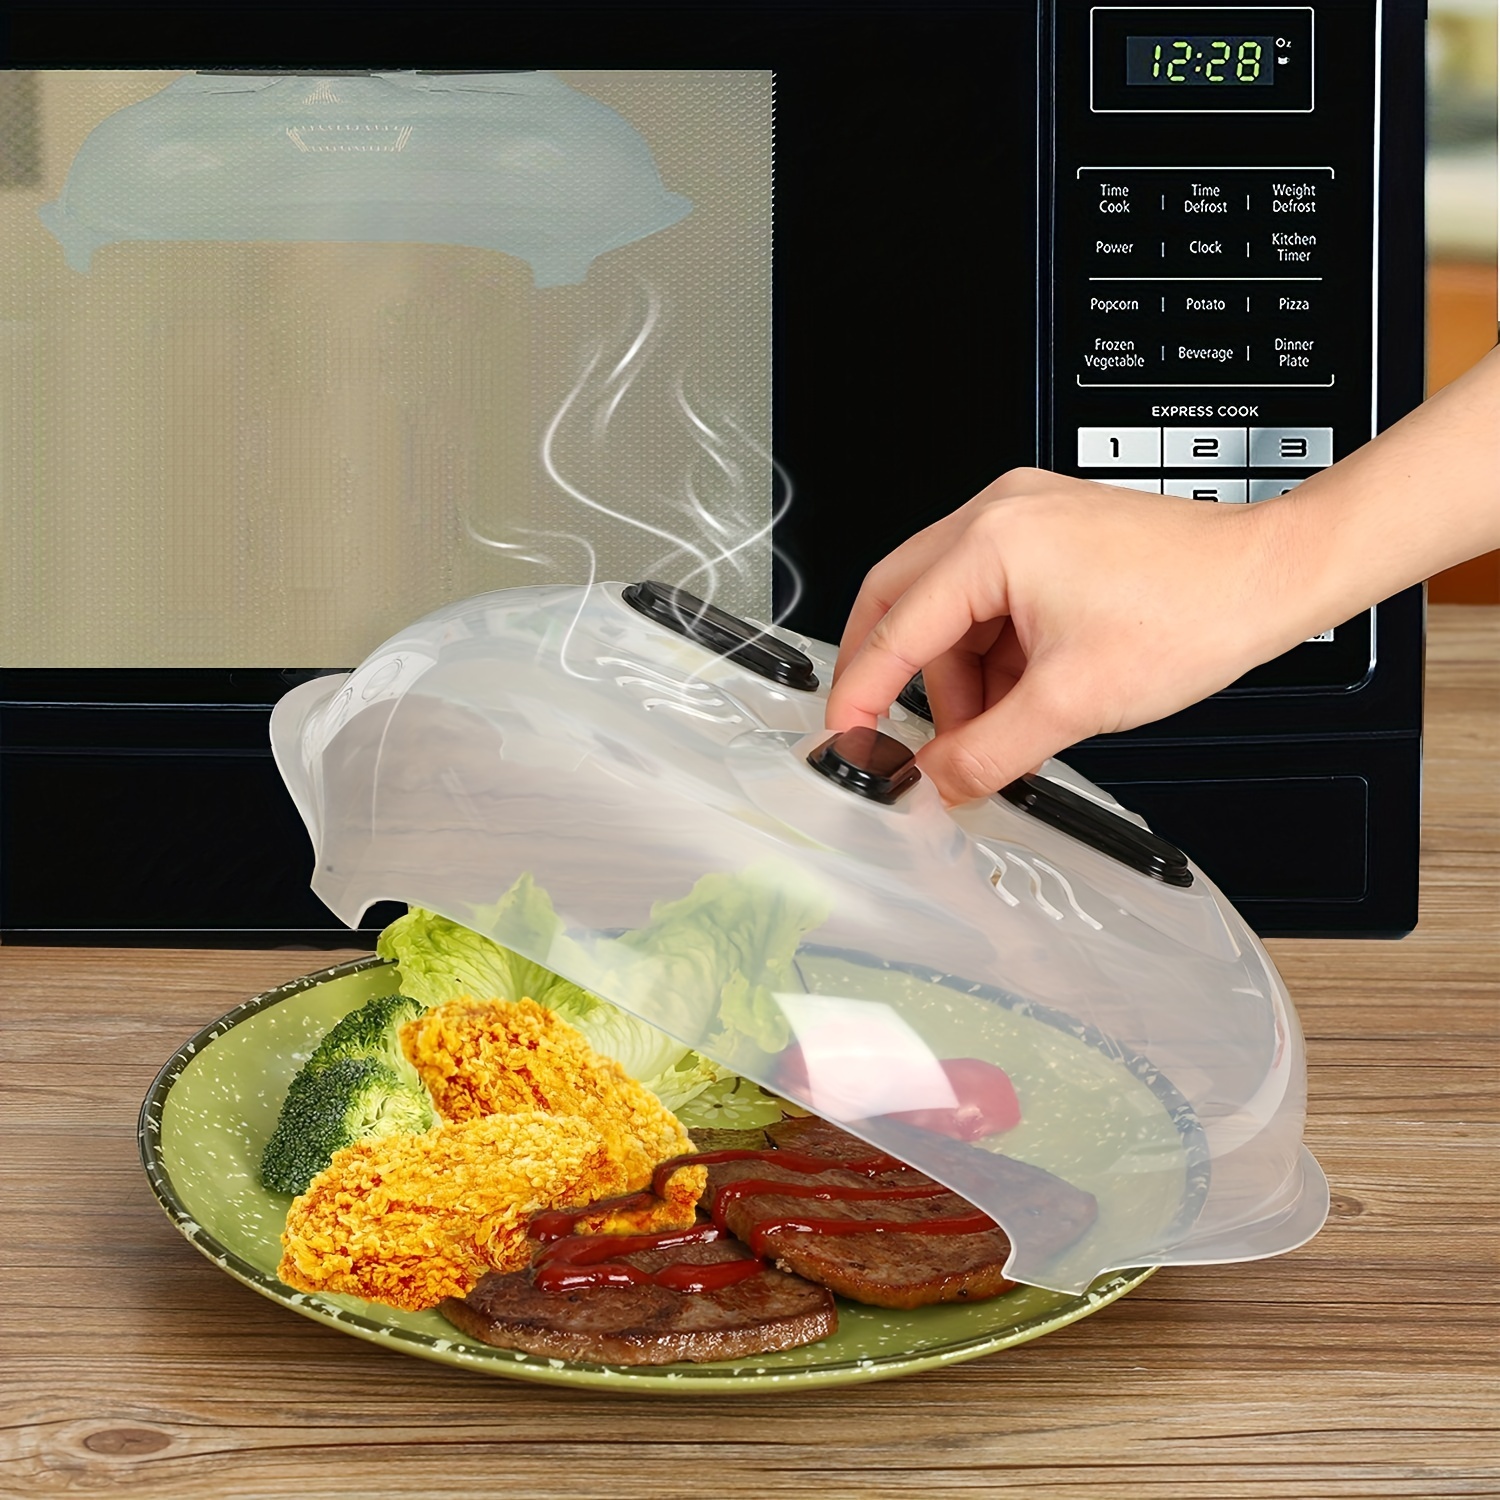 Magnetic Microwave Cover For Food, Microwave Splatter Cover, Clear